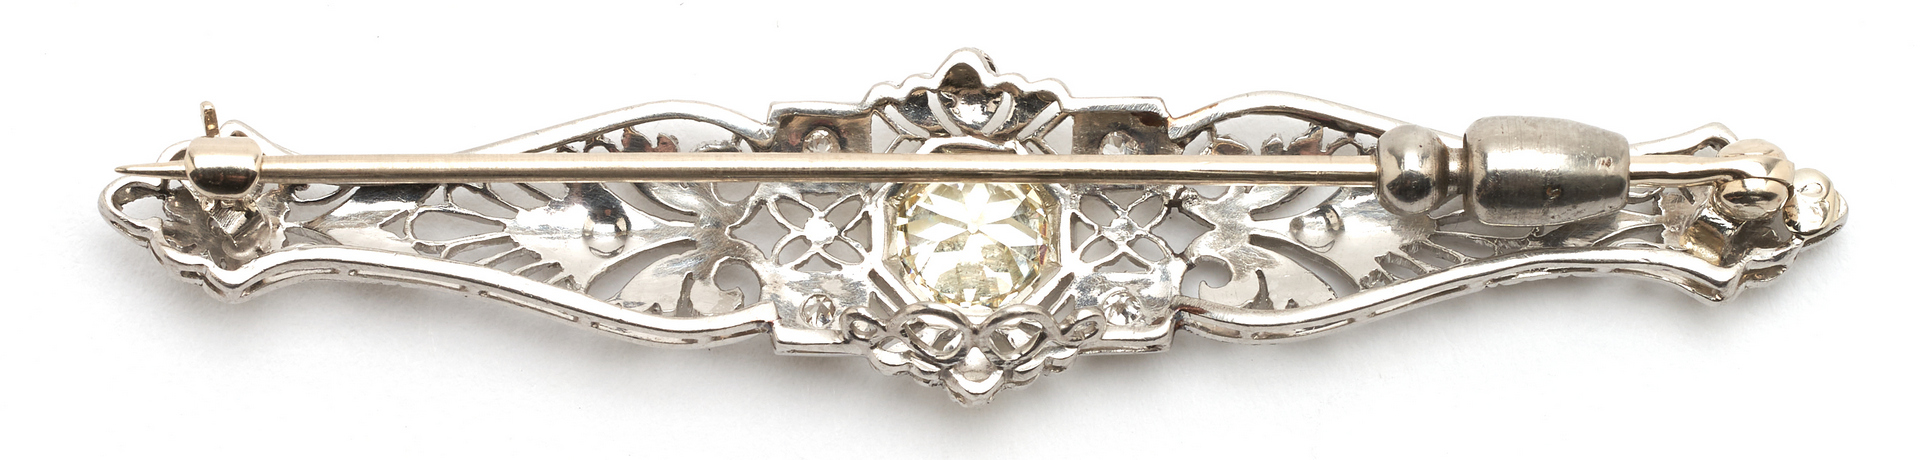 Lot 62: Art Deco Diamond brooch with 1.26 ct old Euro cut